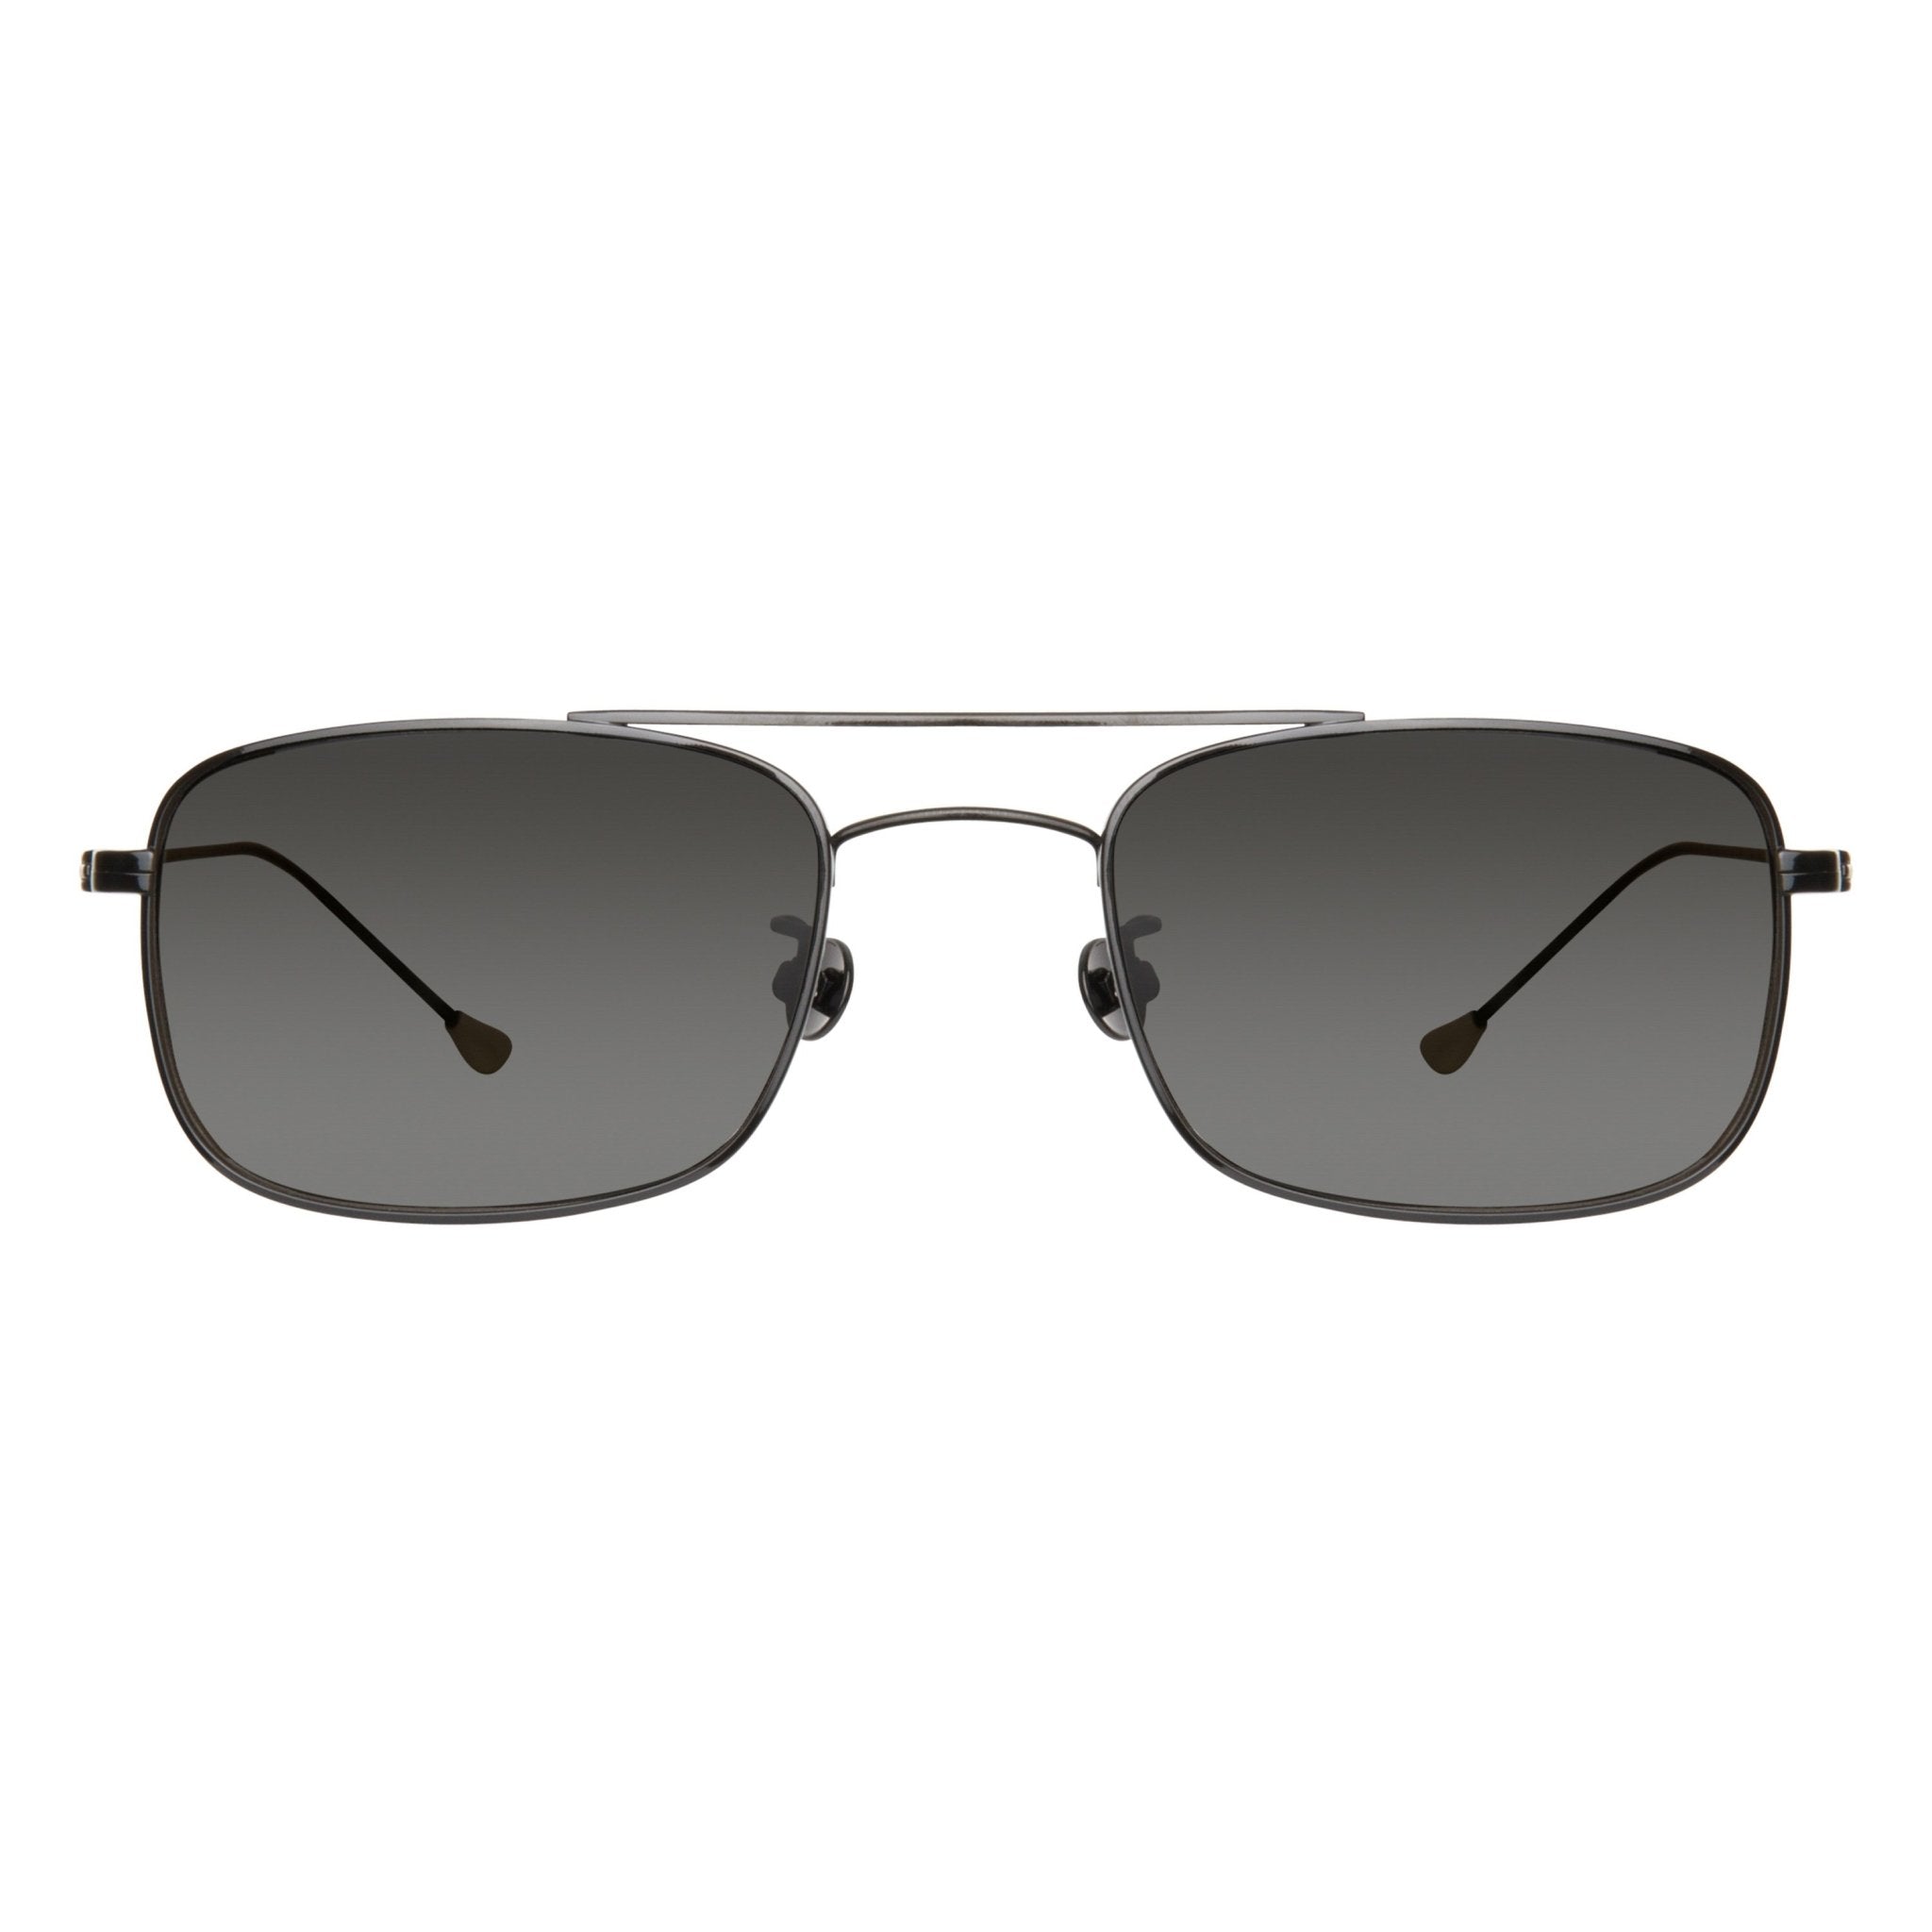 Ann Demeulemeester Sunglasses Black Titanium 925 Silver with Grey Lenses Category 4 Dark Tint AD46C1SUN - Watches & Crystals